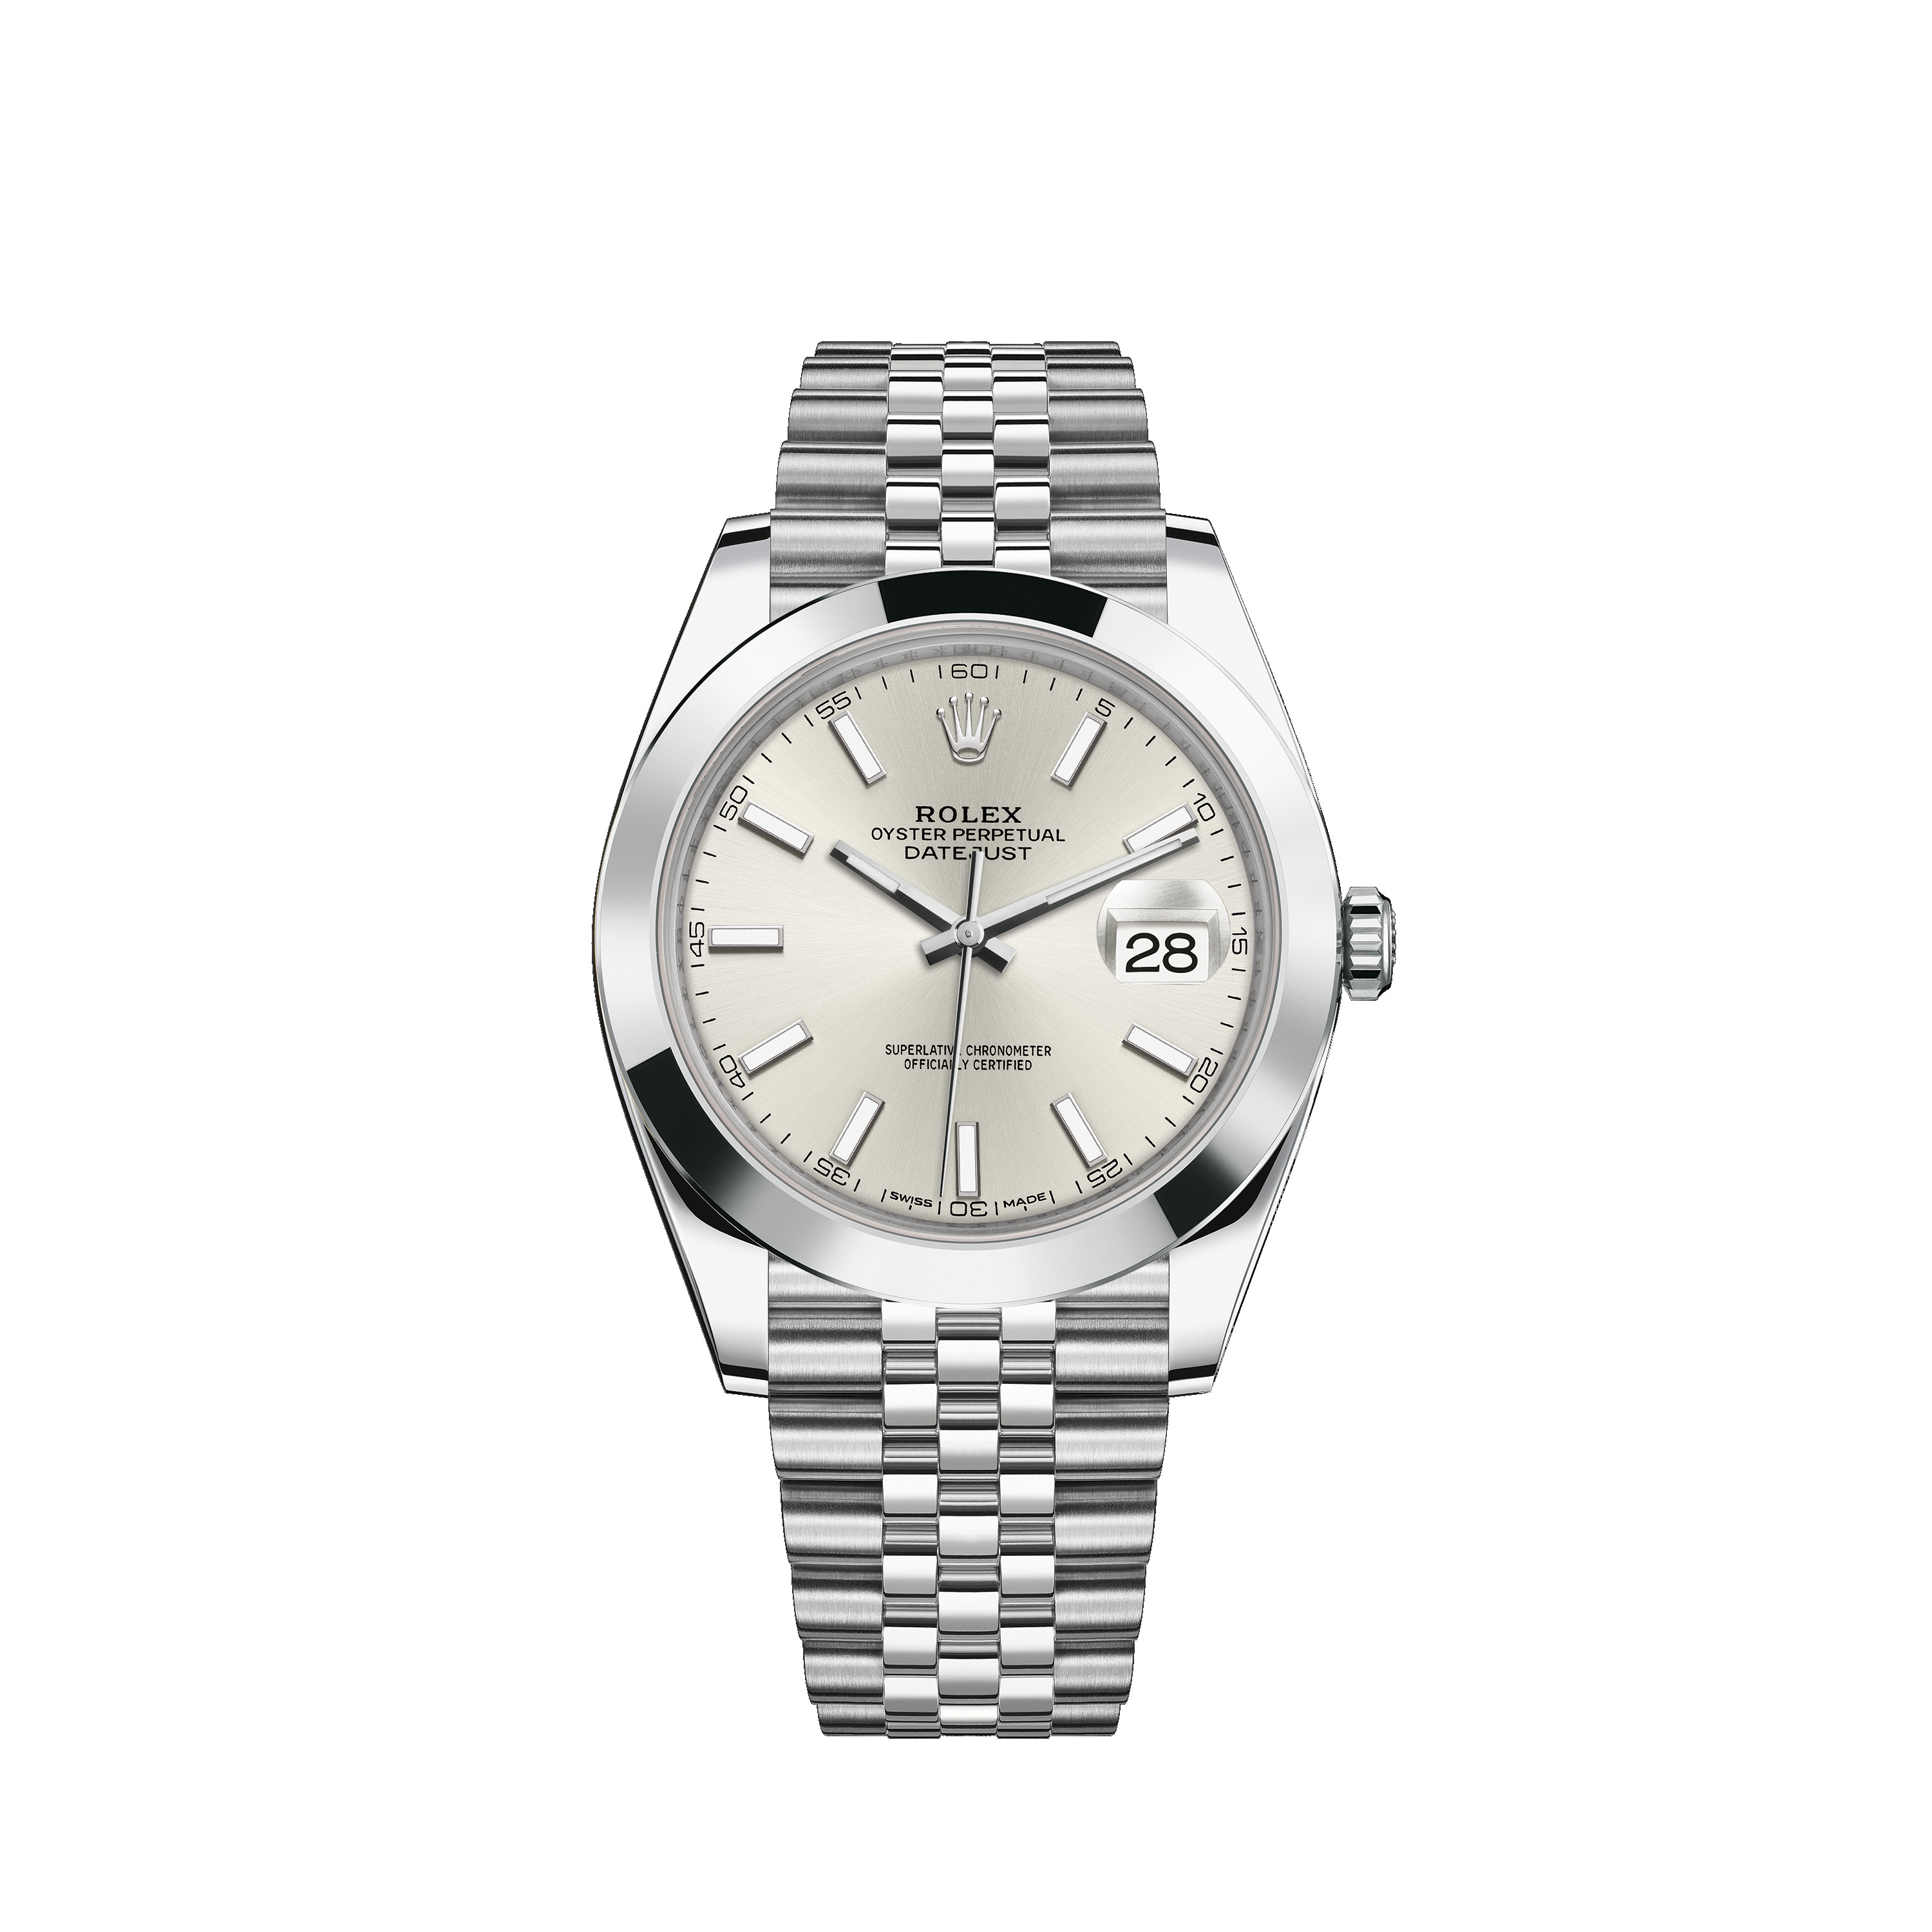 Datejust 41 126300 Stainless Steel Watch (Silver)